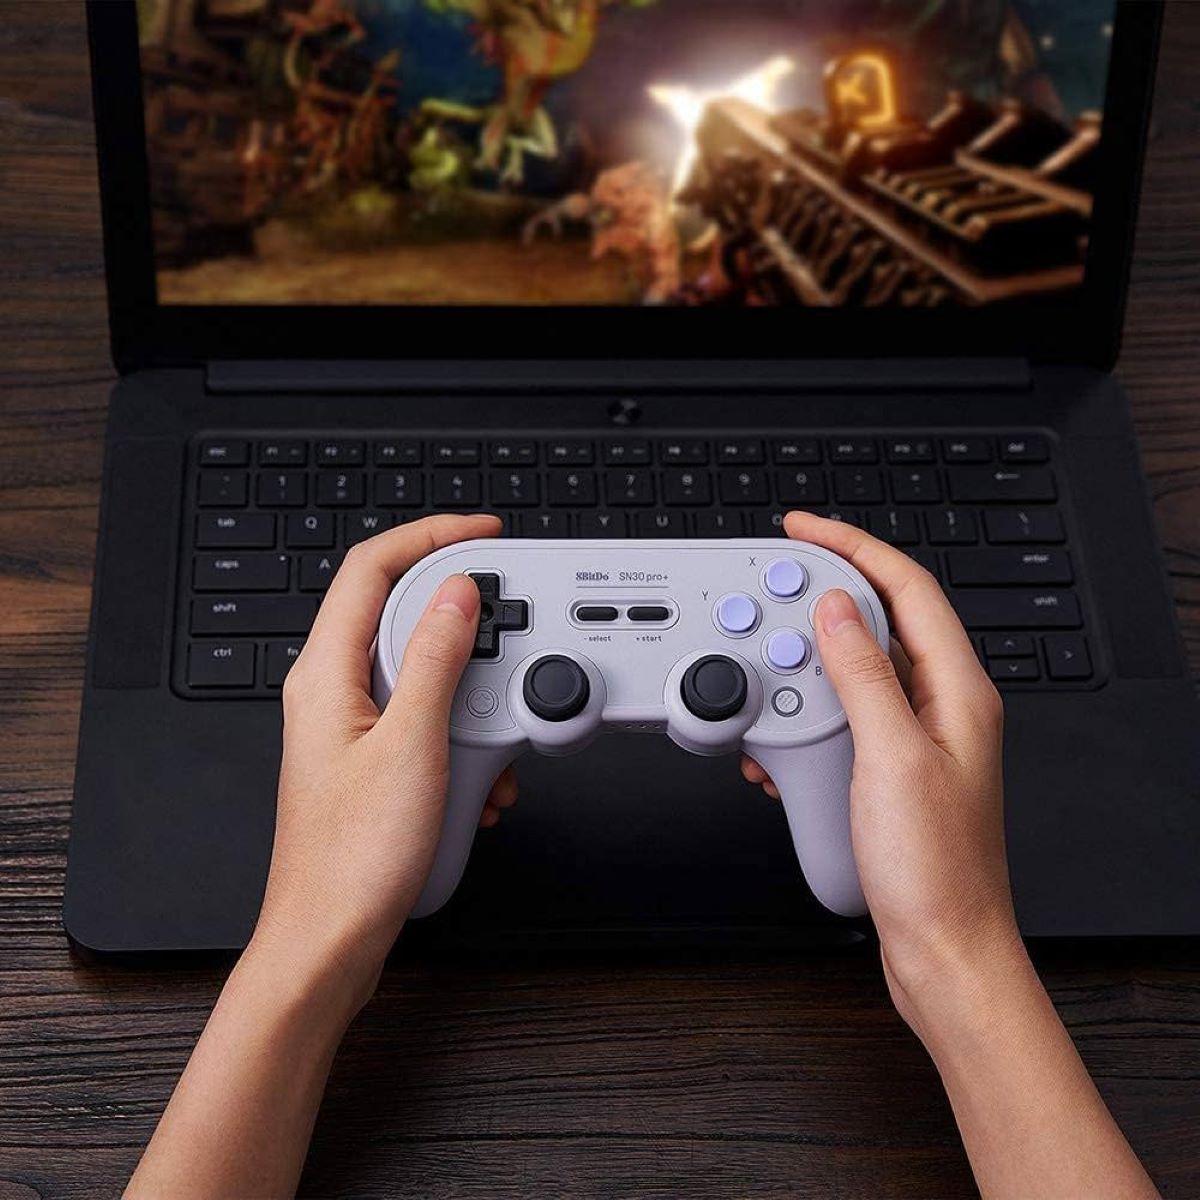 How Do I Use My USB PC Game Controller On My Laptop To Play Android Games On Google Play